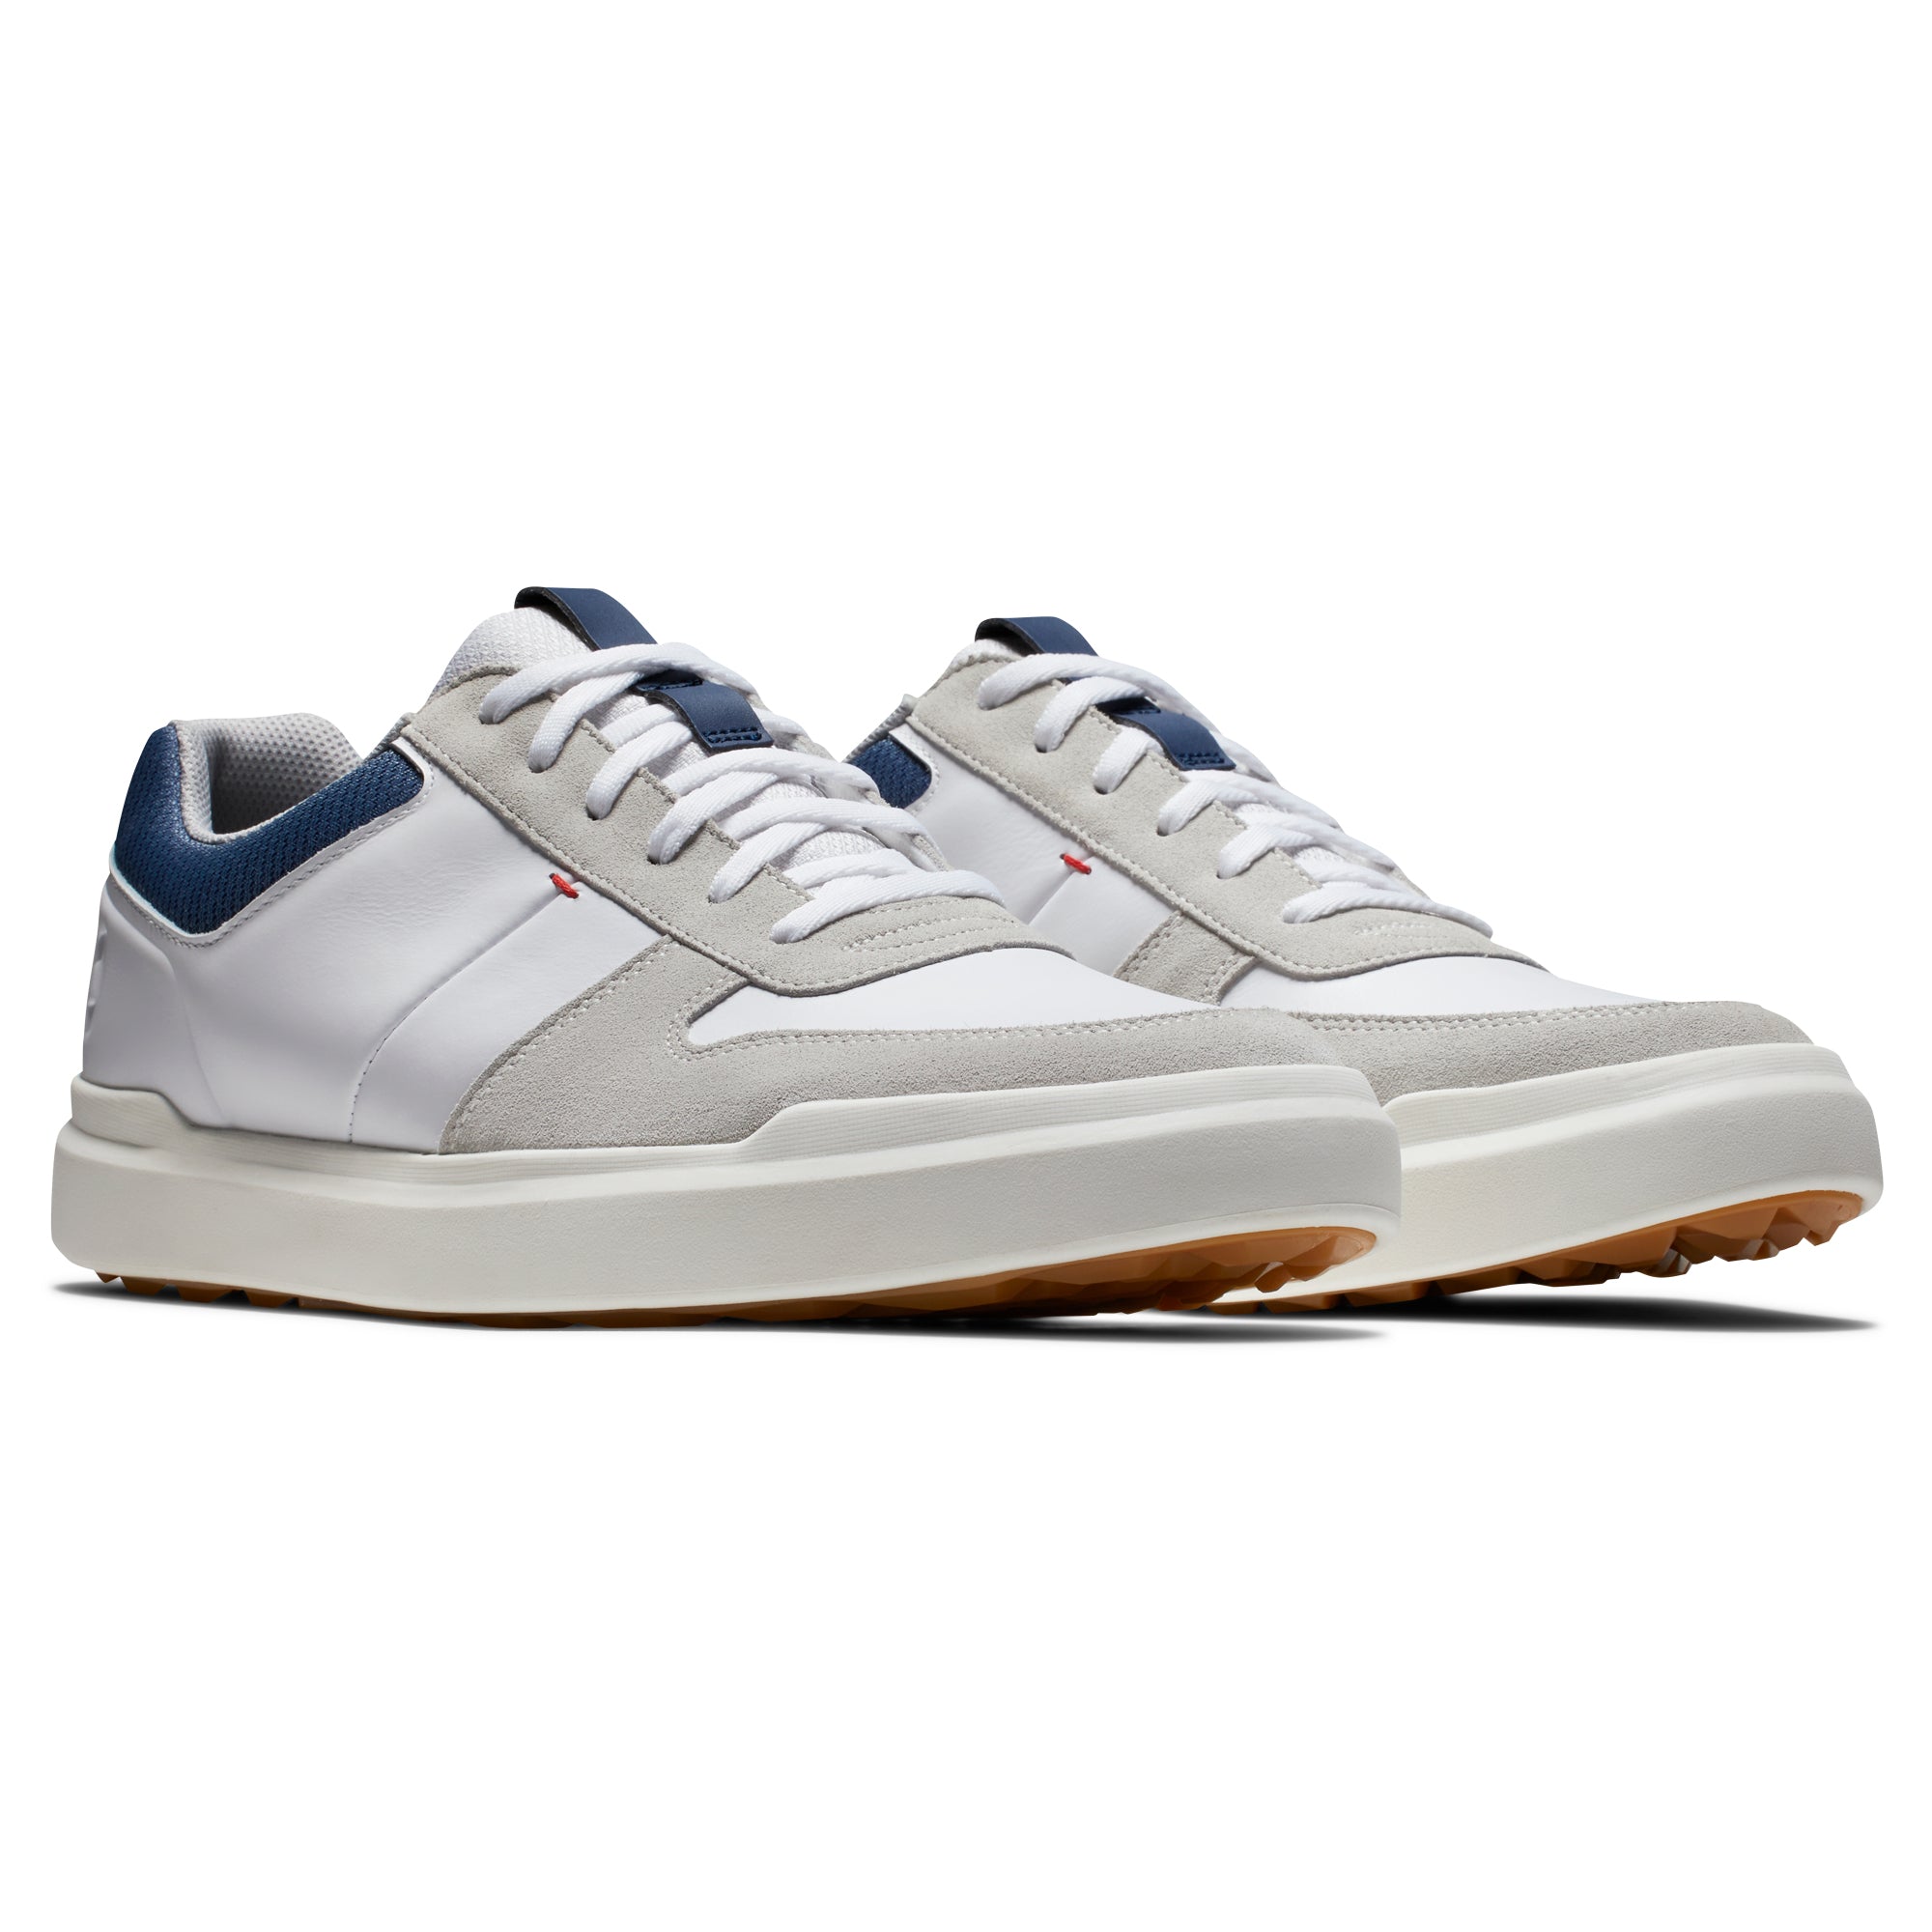 footjoy-contour-casual-golf-shoes-54374-white-navy-grey